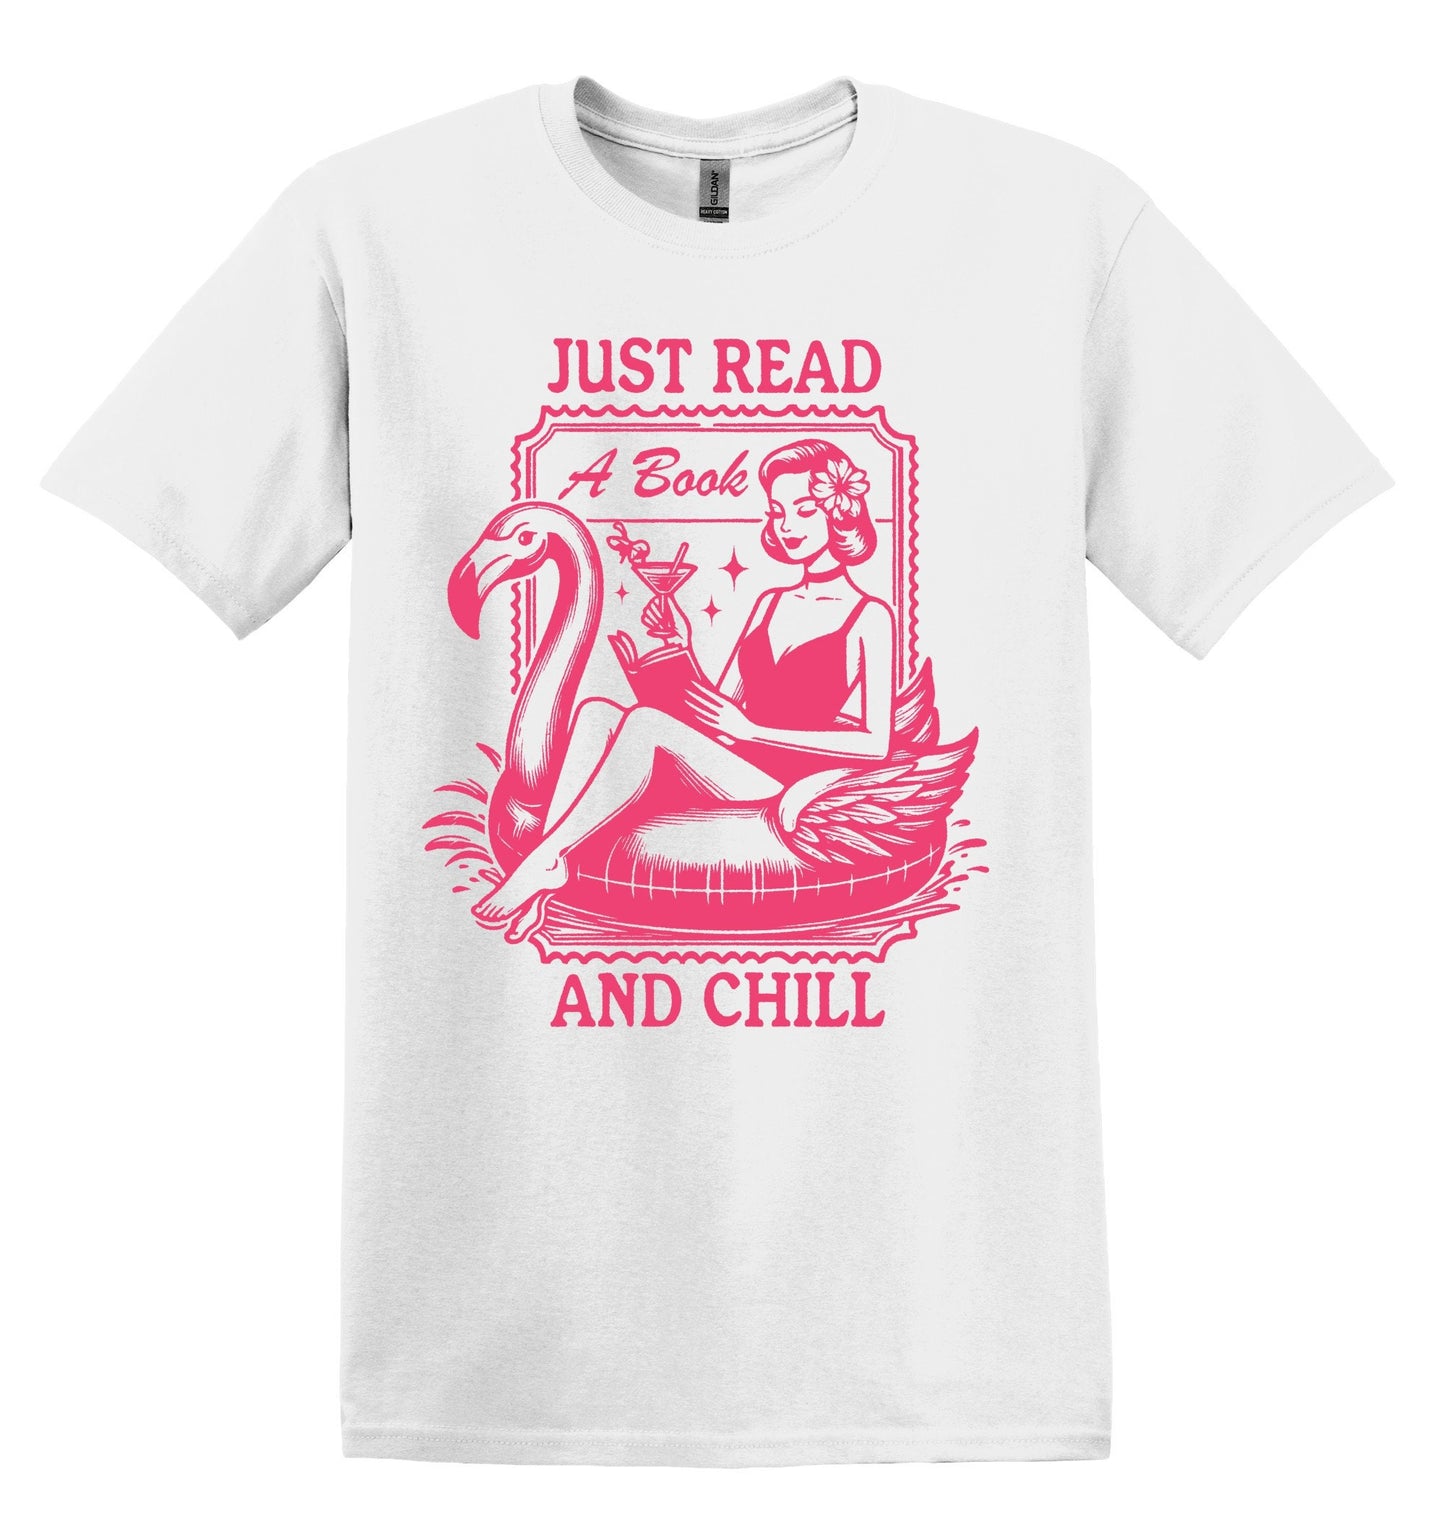 Just Read a Book and Chill Shirt Book shirt Book Lover TShirt Book Club Shirt Book Gift book Lover Gifts Reading Shirt